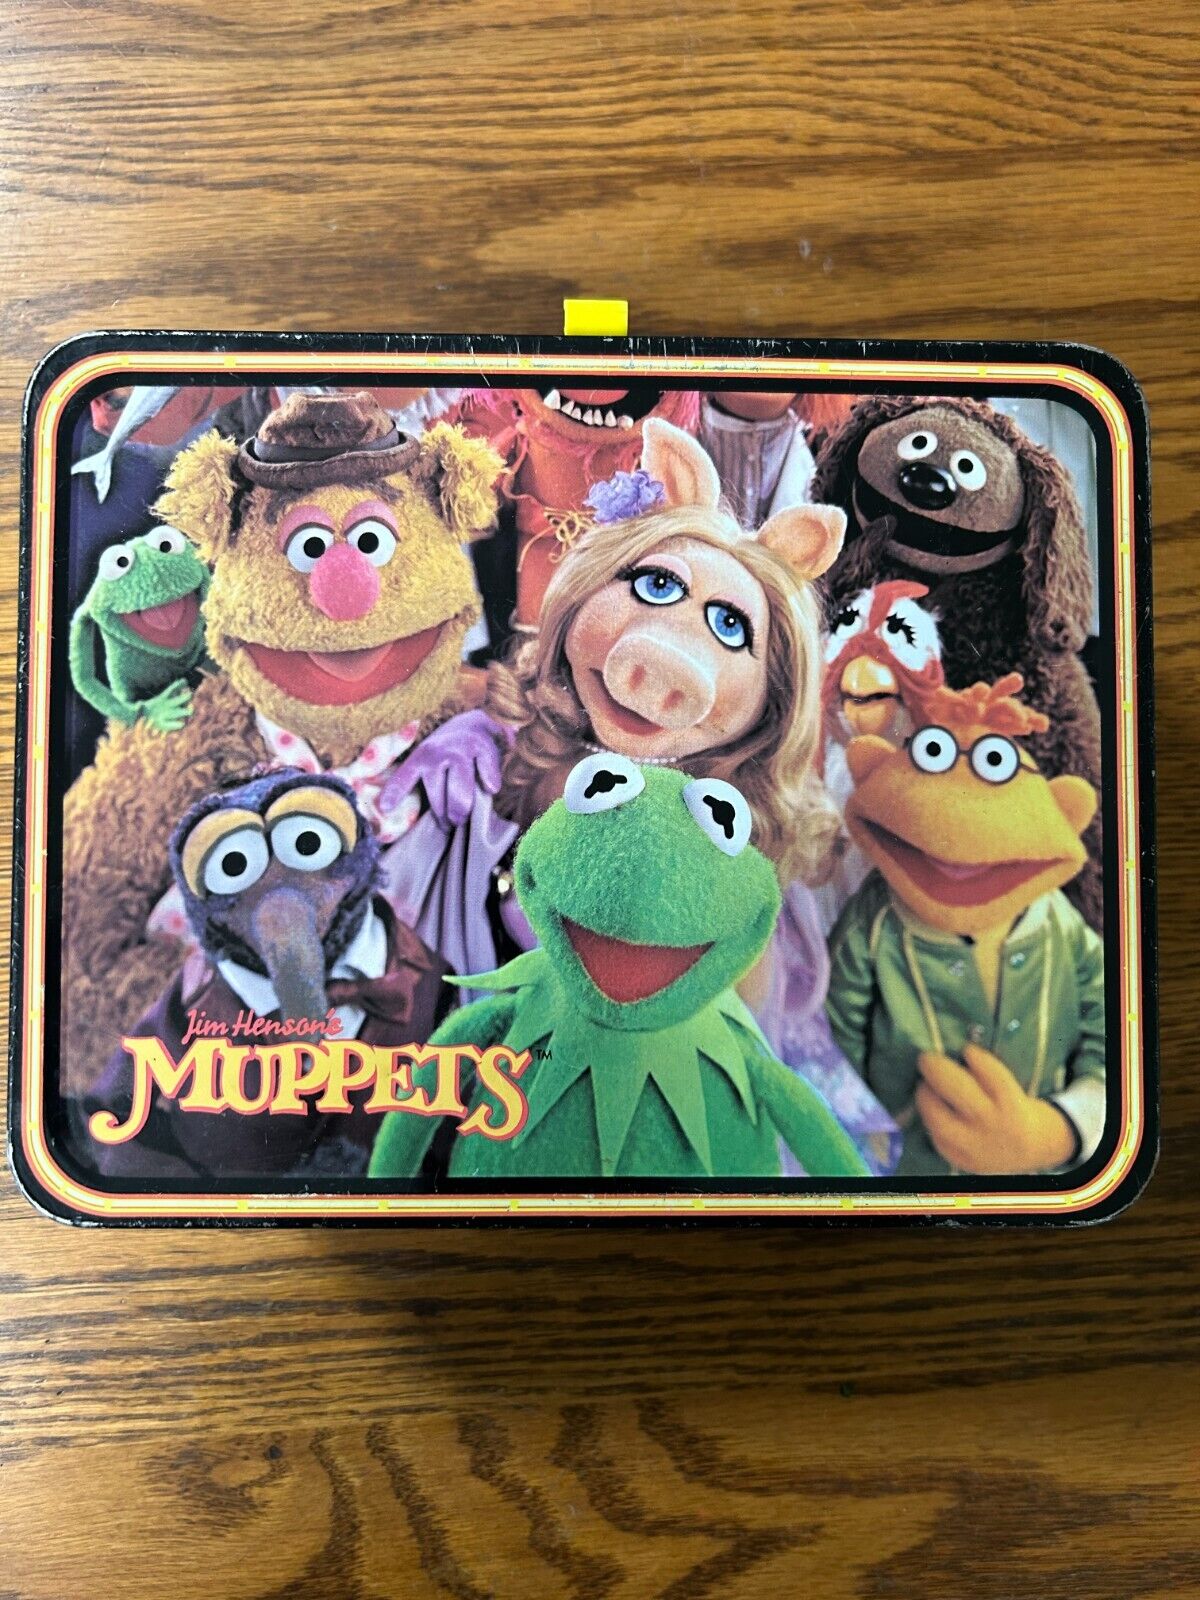 Jim Henson\'s The Muppets Fozzie Bear Vintage 1979 Lunch Box - No Thermos